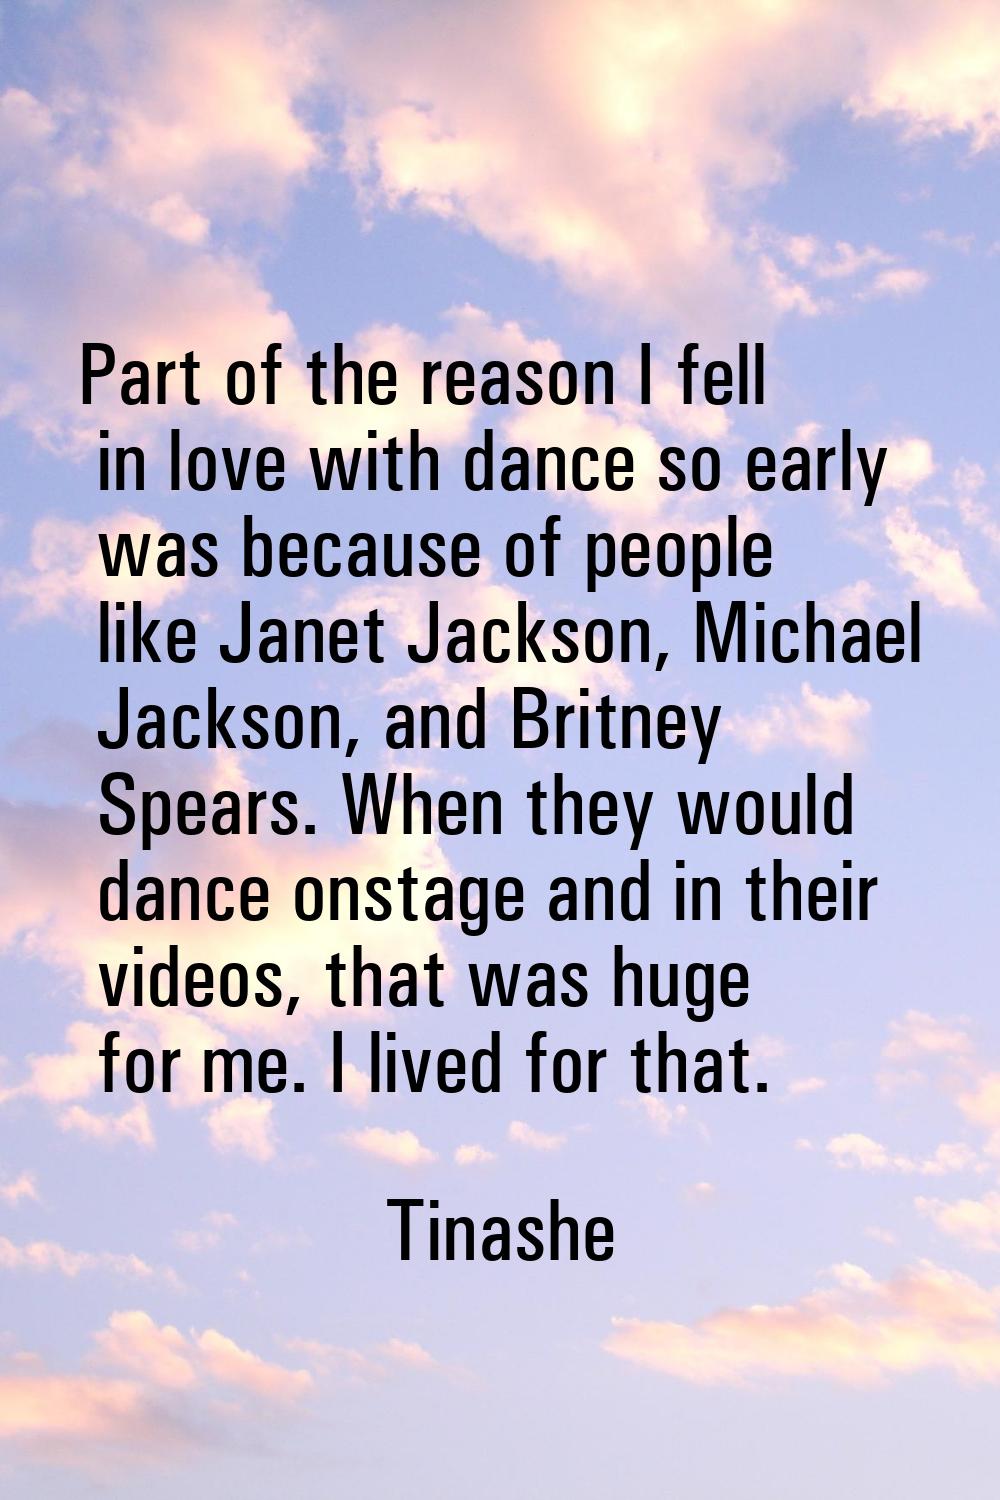 Part of the reason I fell in love with dance so early was because of people like Janet Jackson, Mic